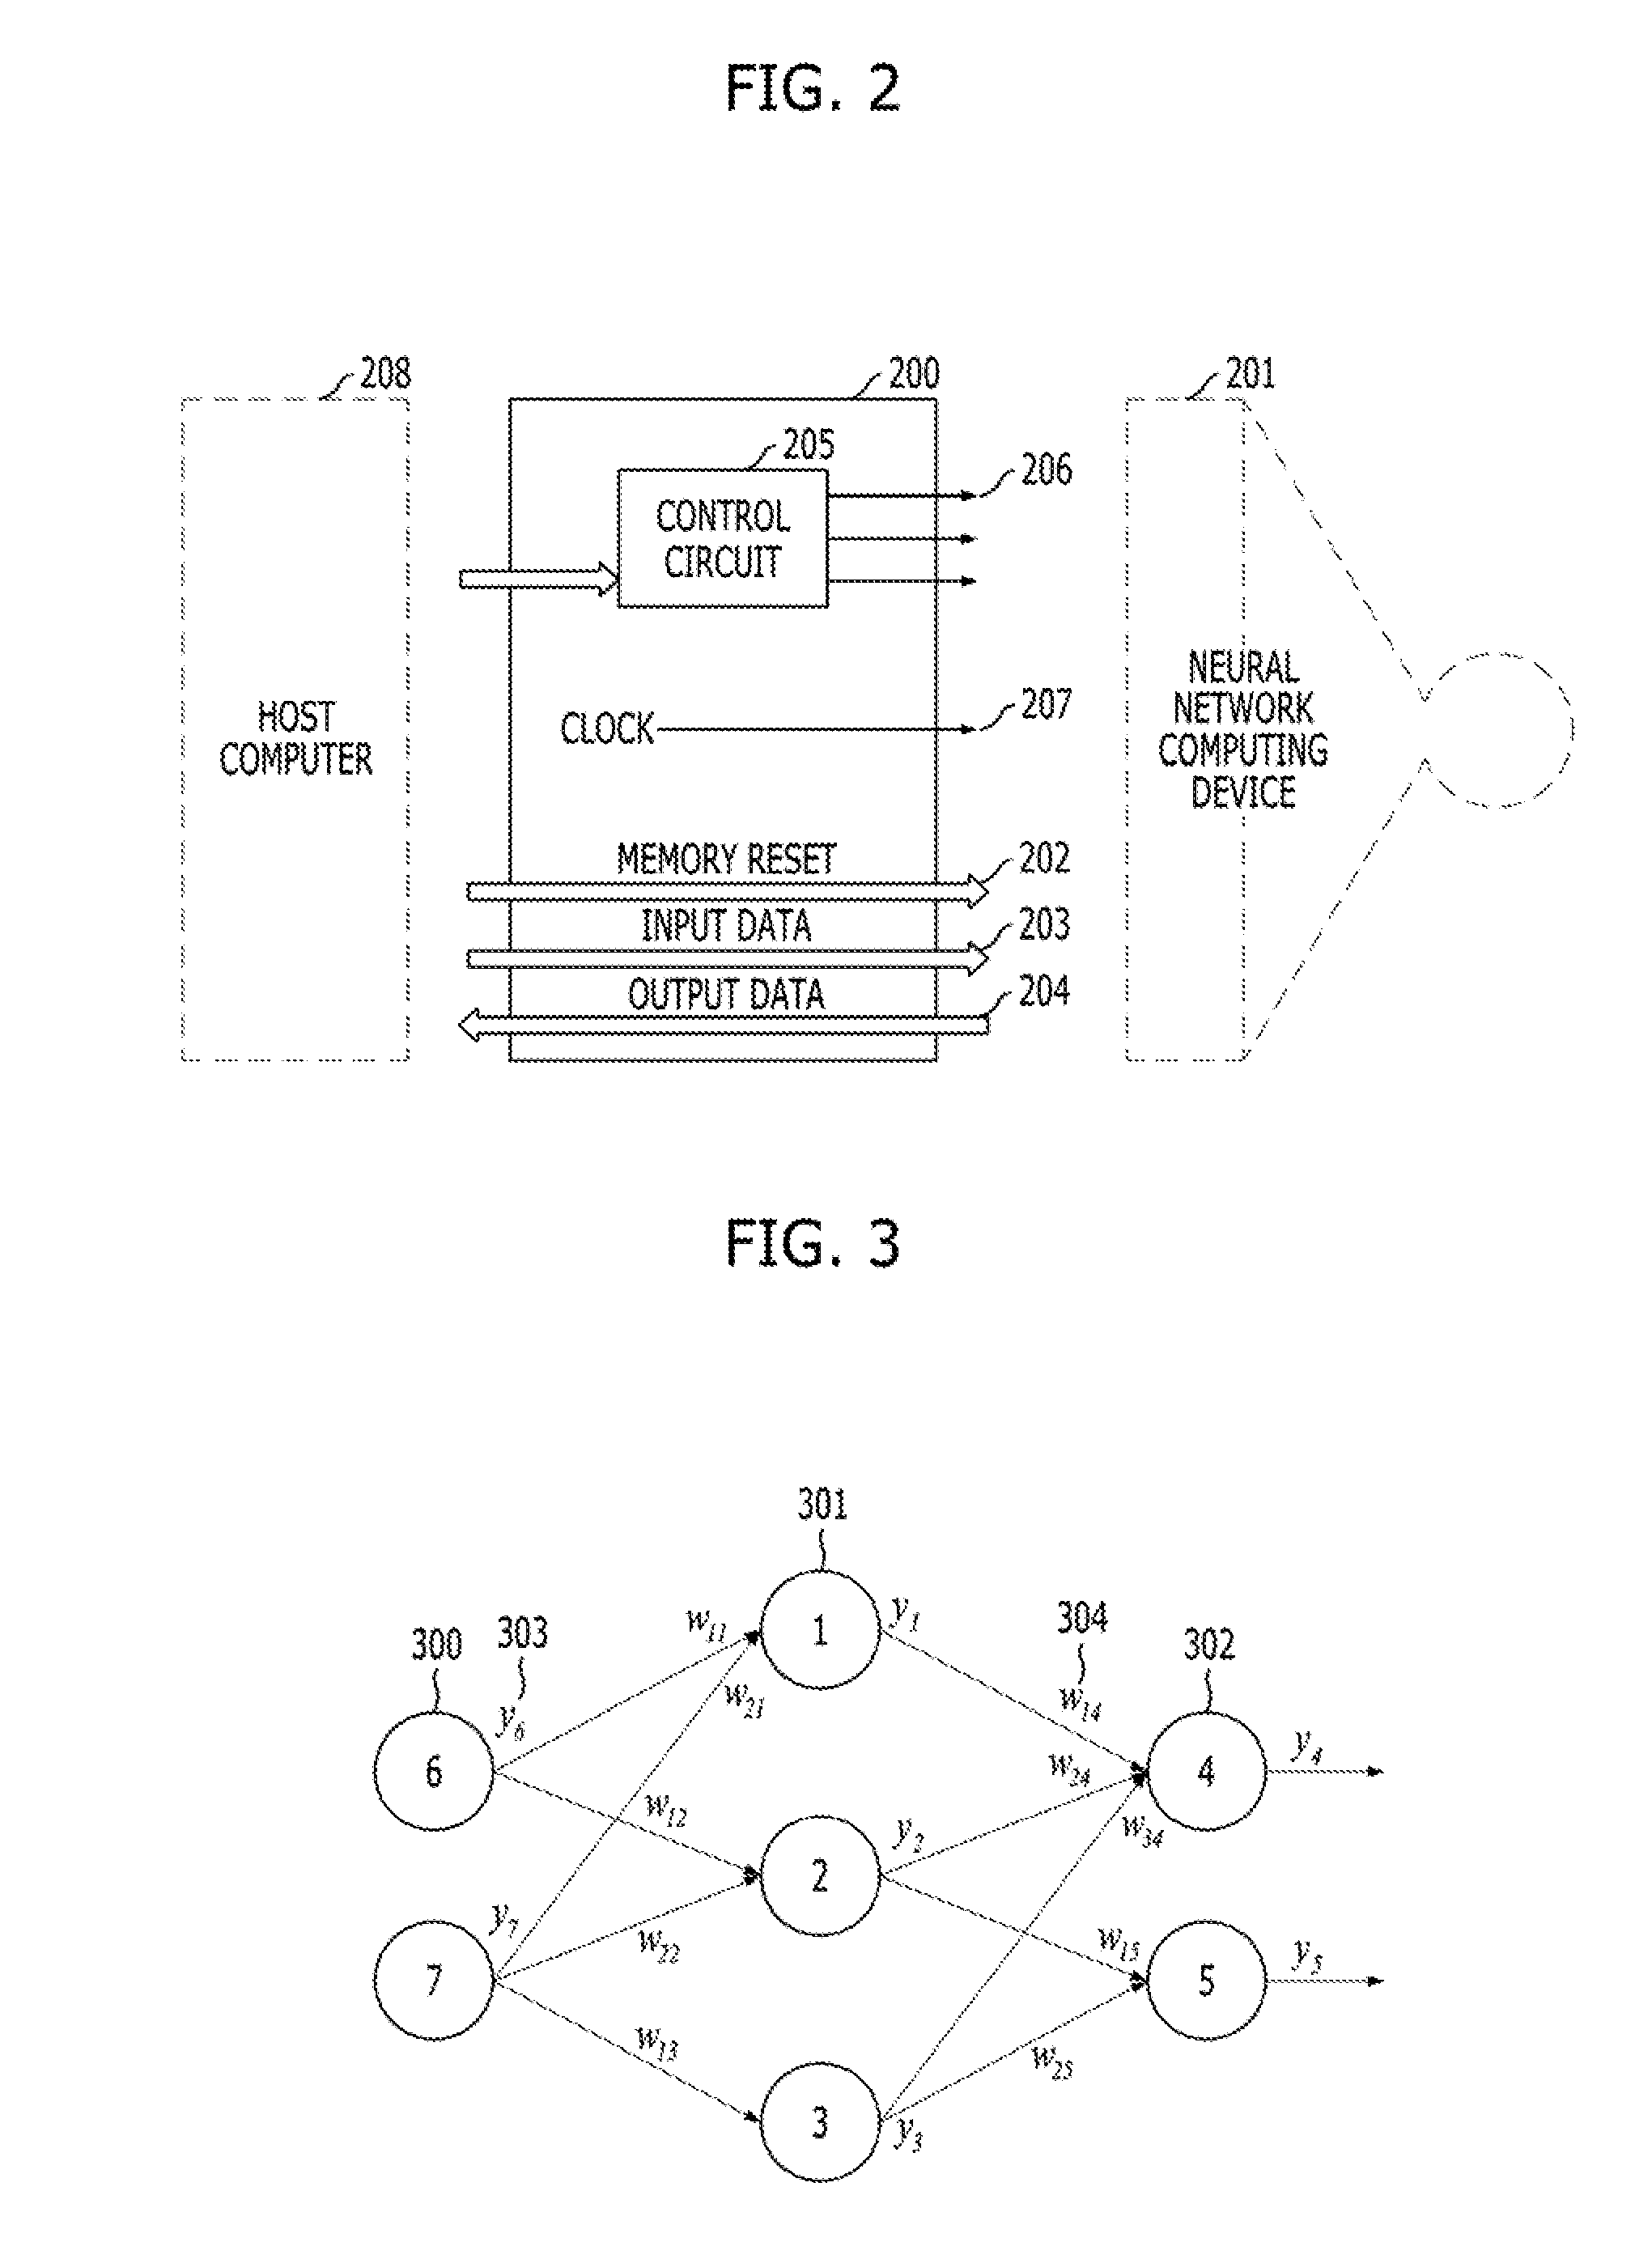 Neural network computing device, system and method